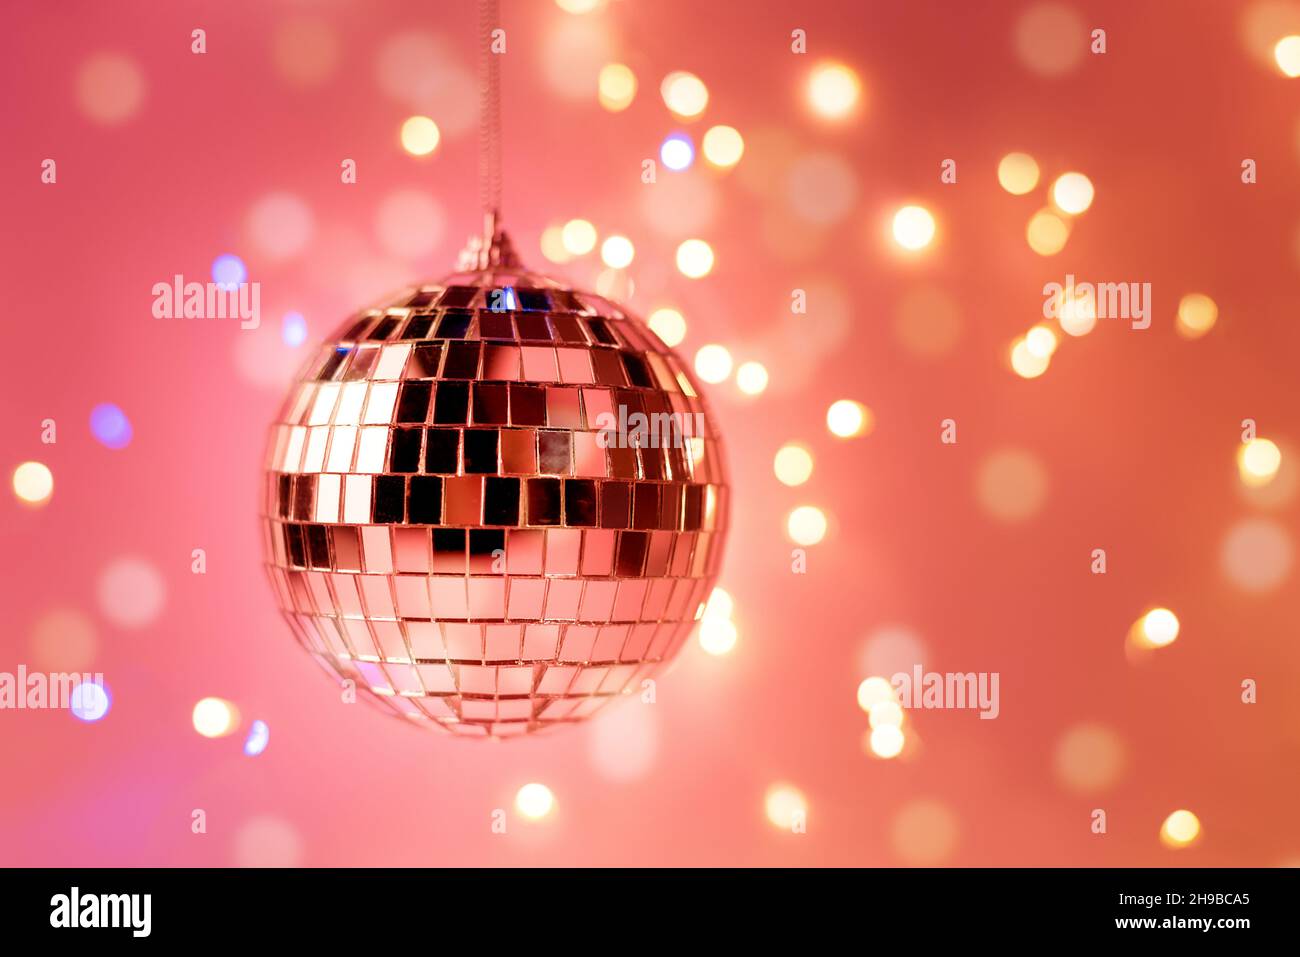 Pink Disco Party Texture Stock Photo, Picture and Royalty Free